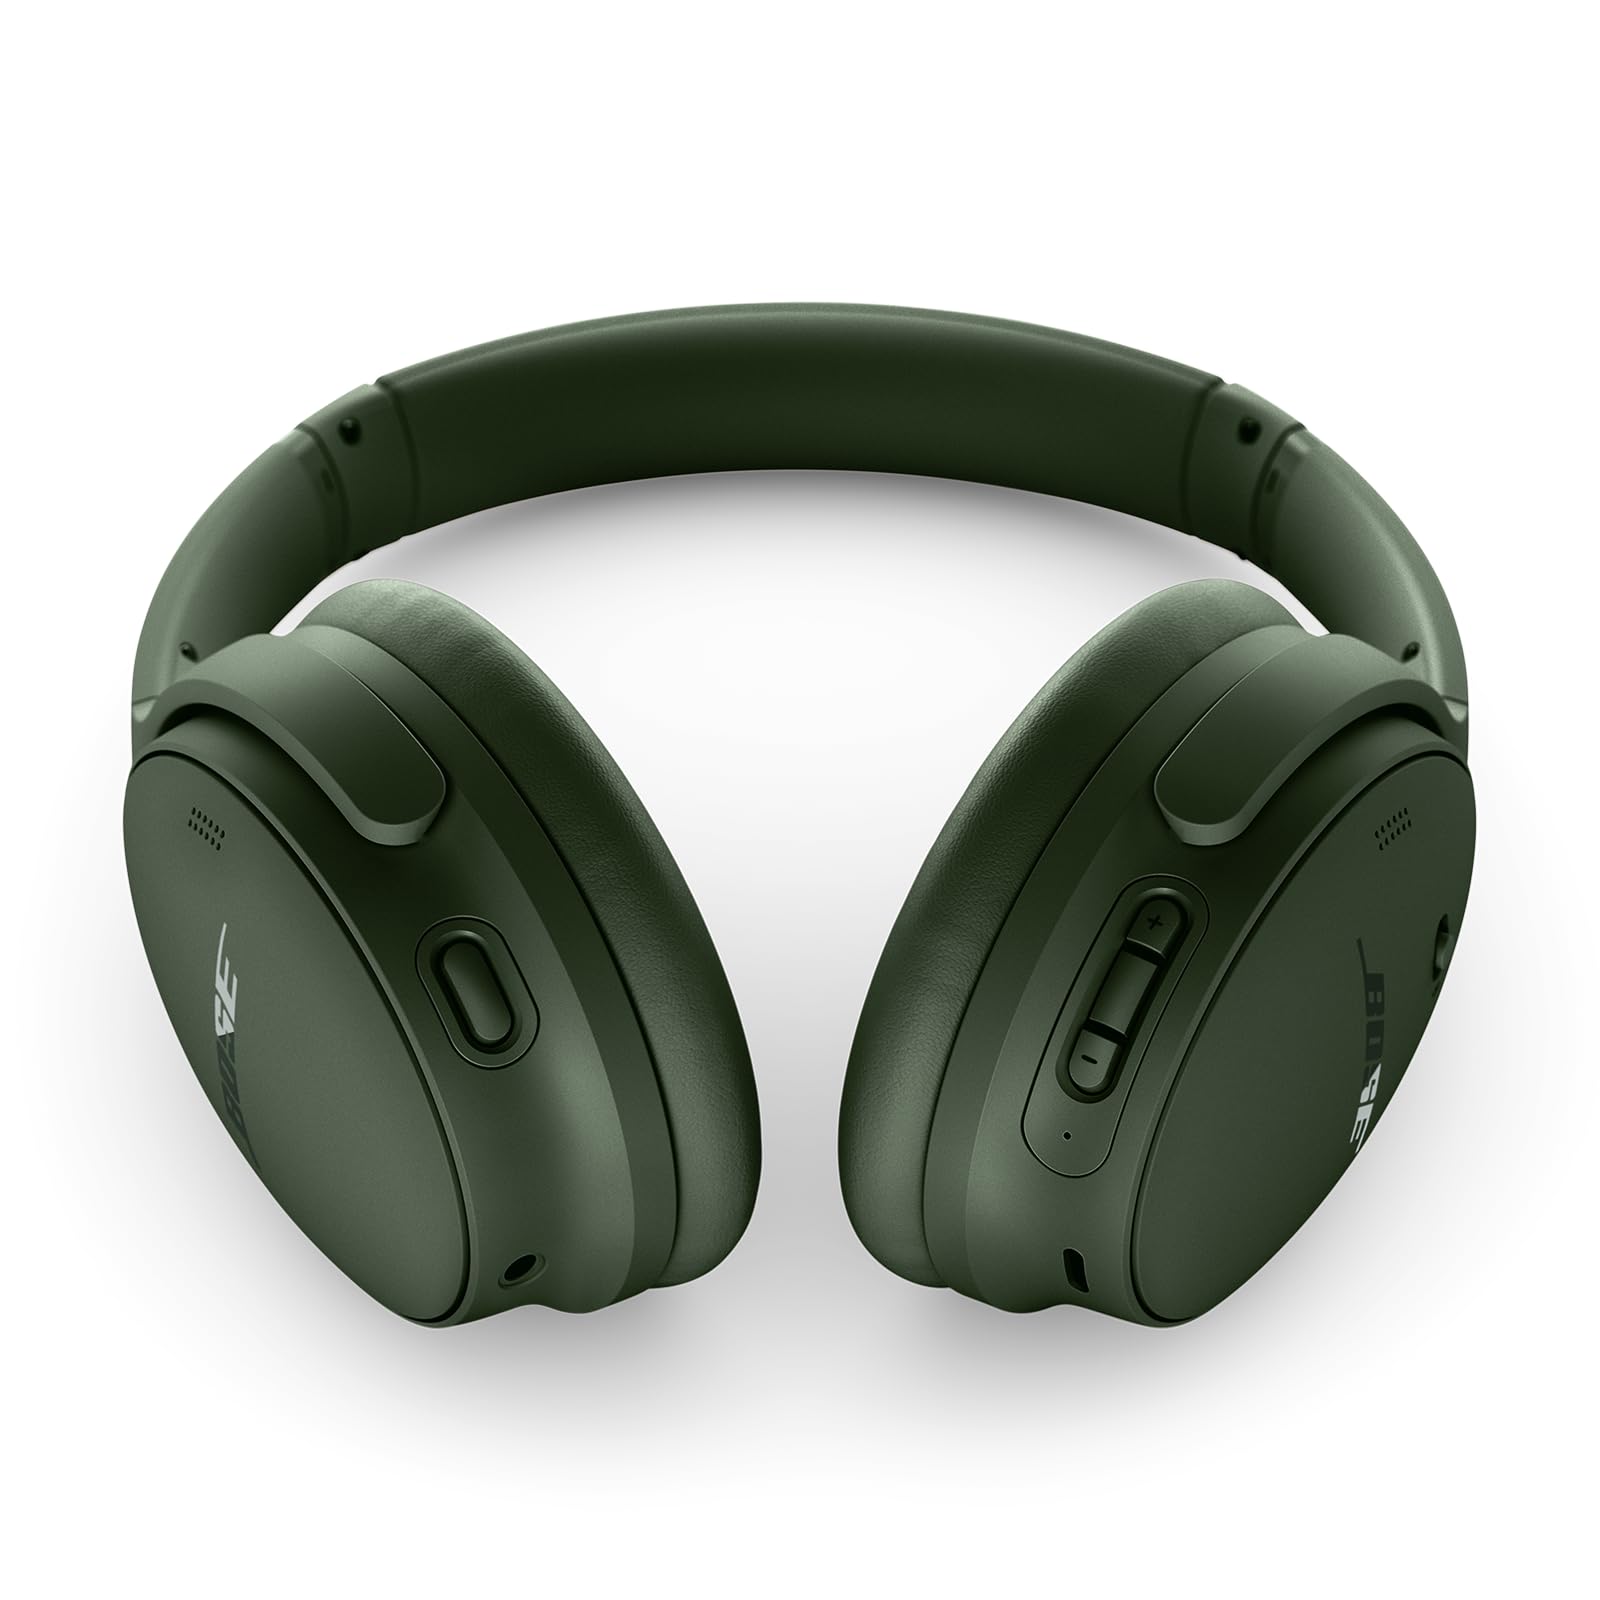 NEW Bose QuietComfort Wireless Noise Cancelling Headphones, Bluetooth Over Ear Headphones with Up To 24 Hours of Battery Life, Cypress Green